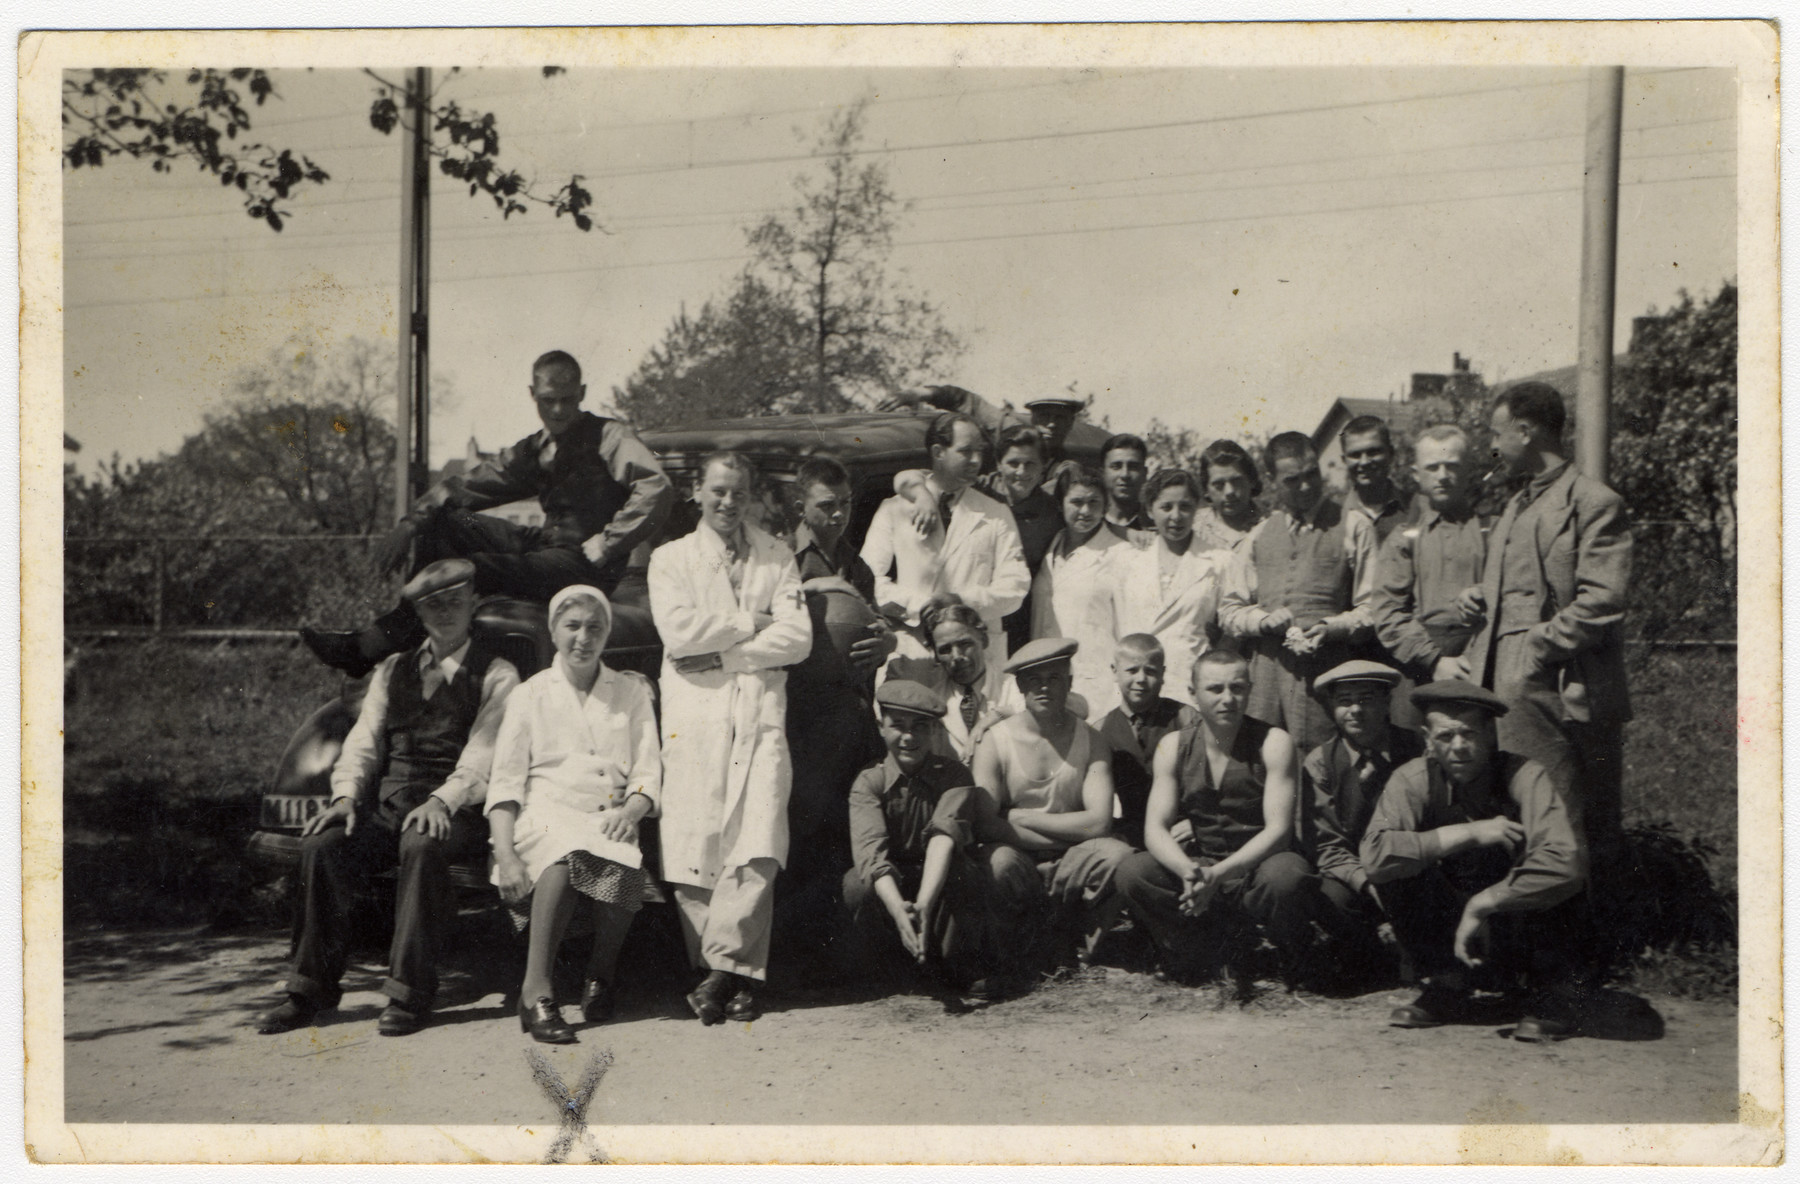 Group portrait of medical personnel and unidentified men in Sweden. 

Among those pictured is Edith Scherzer, sitting second from the left in the first row.